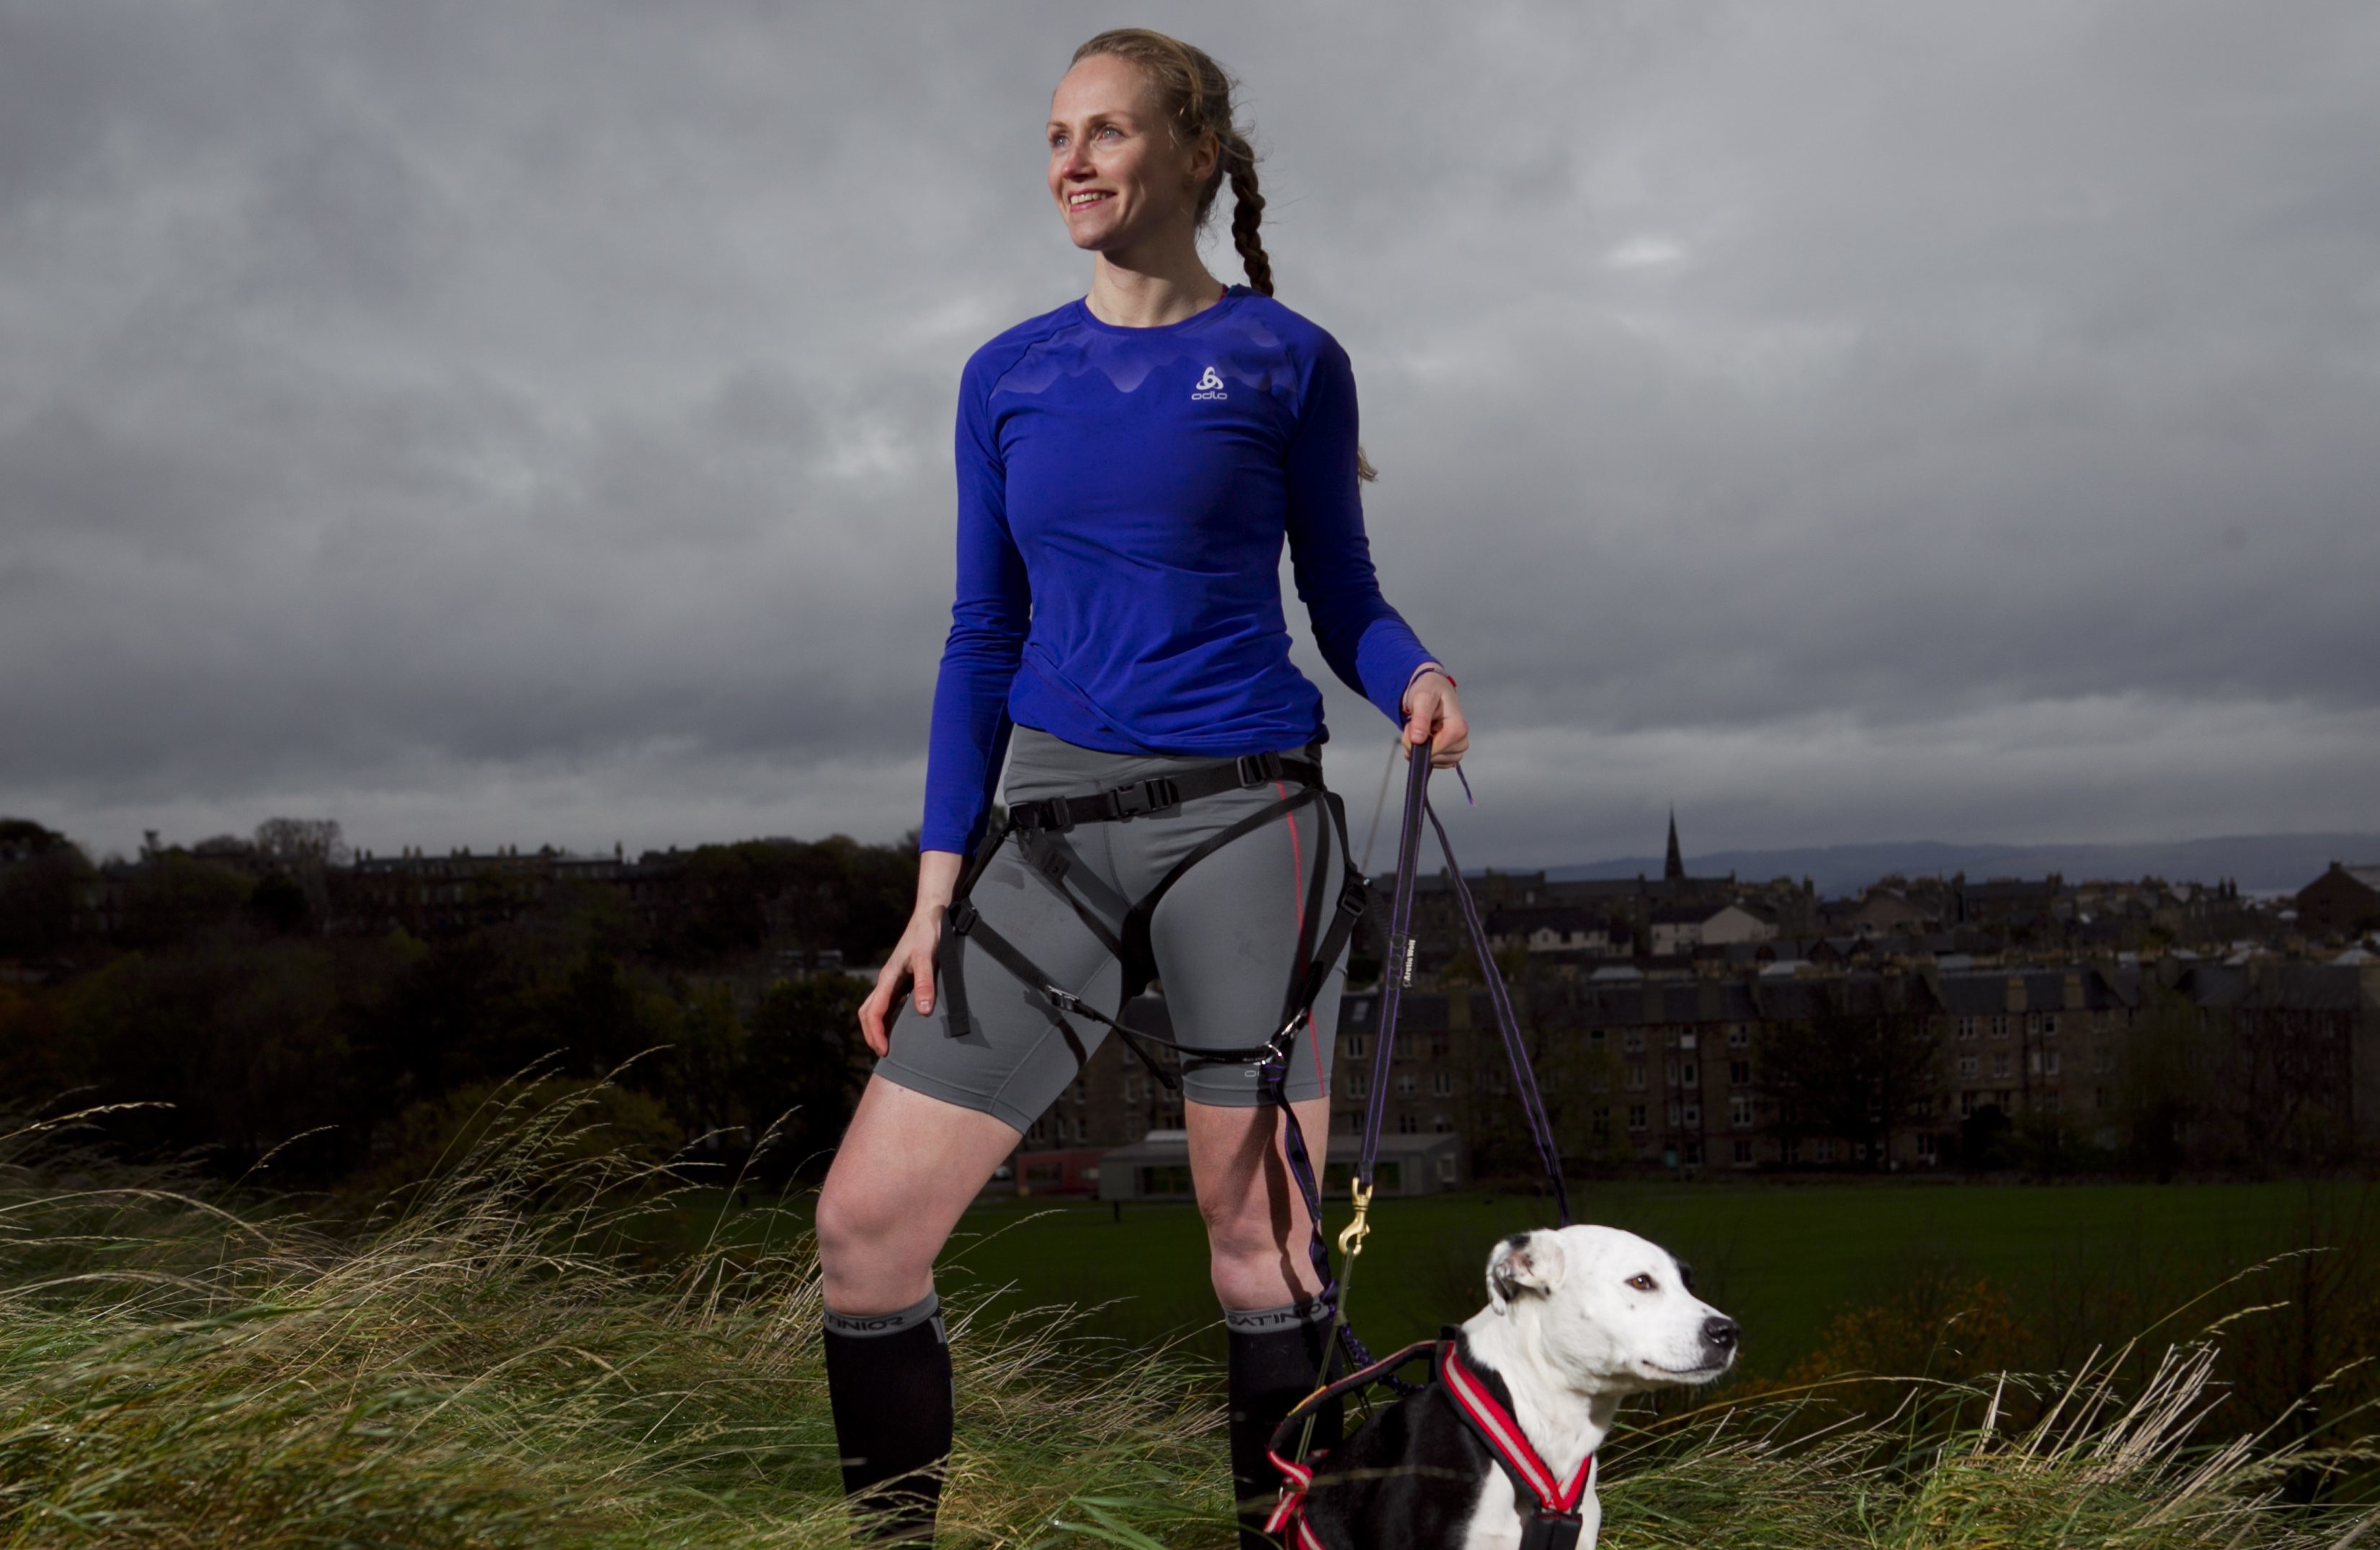 Agata Zaremba, and her dog, Roger, who compete in CaniCross - crossing country running with dogs (Andrew Cawley / DC Thomson)